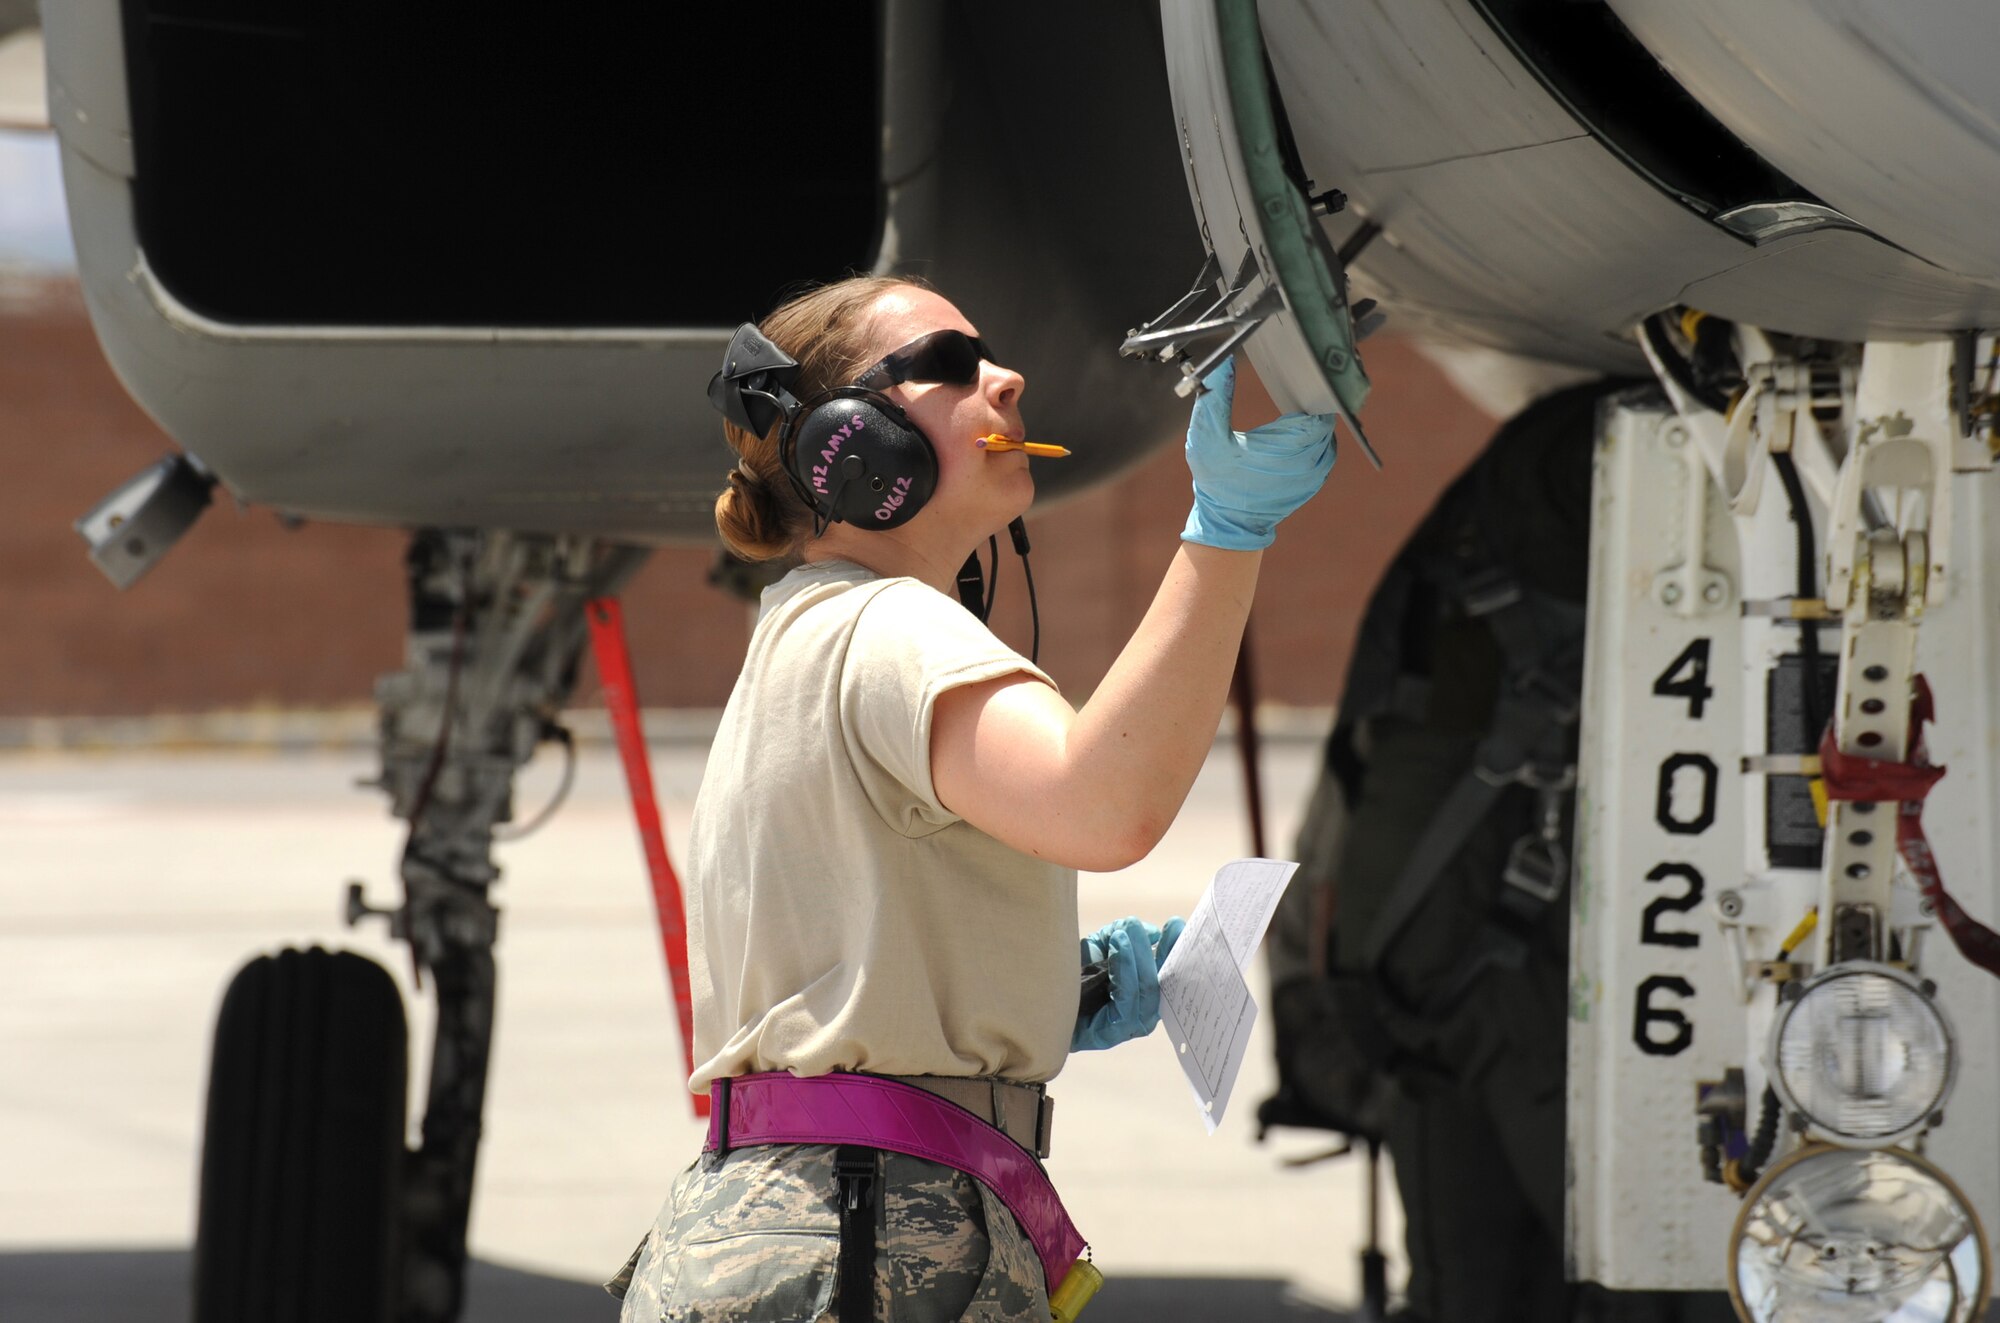 Oregon Air National Guard Senior Airman Aimee Lonidier, a crew chief with the 142nd Fighter Wing does a post flight check of an F-15 Eagle at Nellis Air Force Base, Nev., during the Weapons Instructor Course, May 30, 2017 (U.S. Air National Guard photo by Master Sgt. John Hughel, 142nd Fighter Wing Public Affairs). 